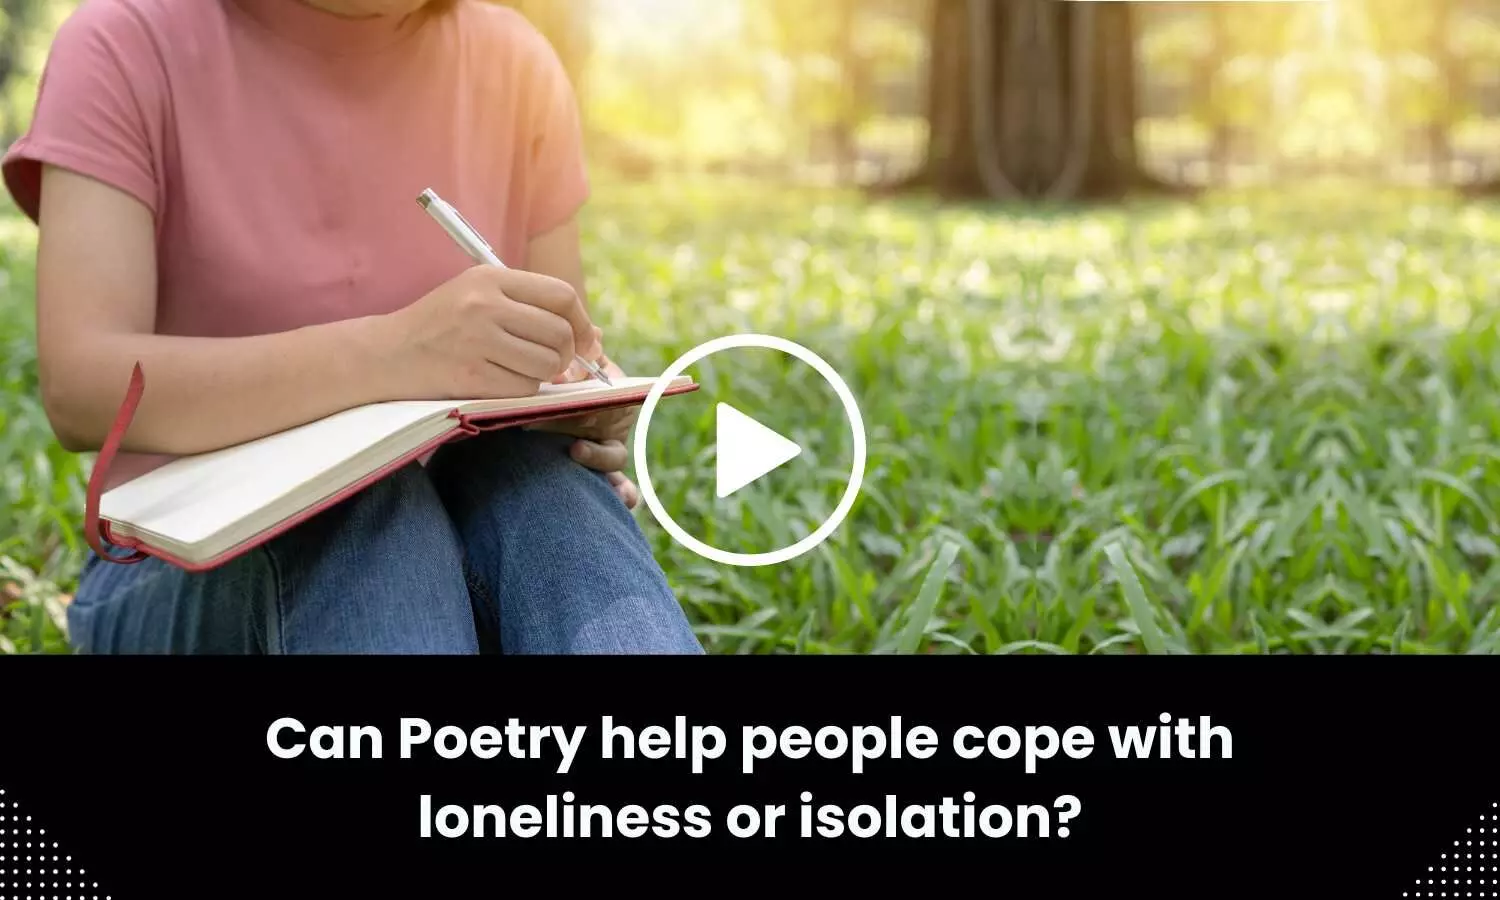 Can Poetry help people cope with loneliness or isolation?